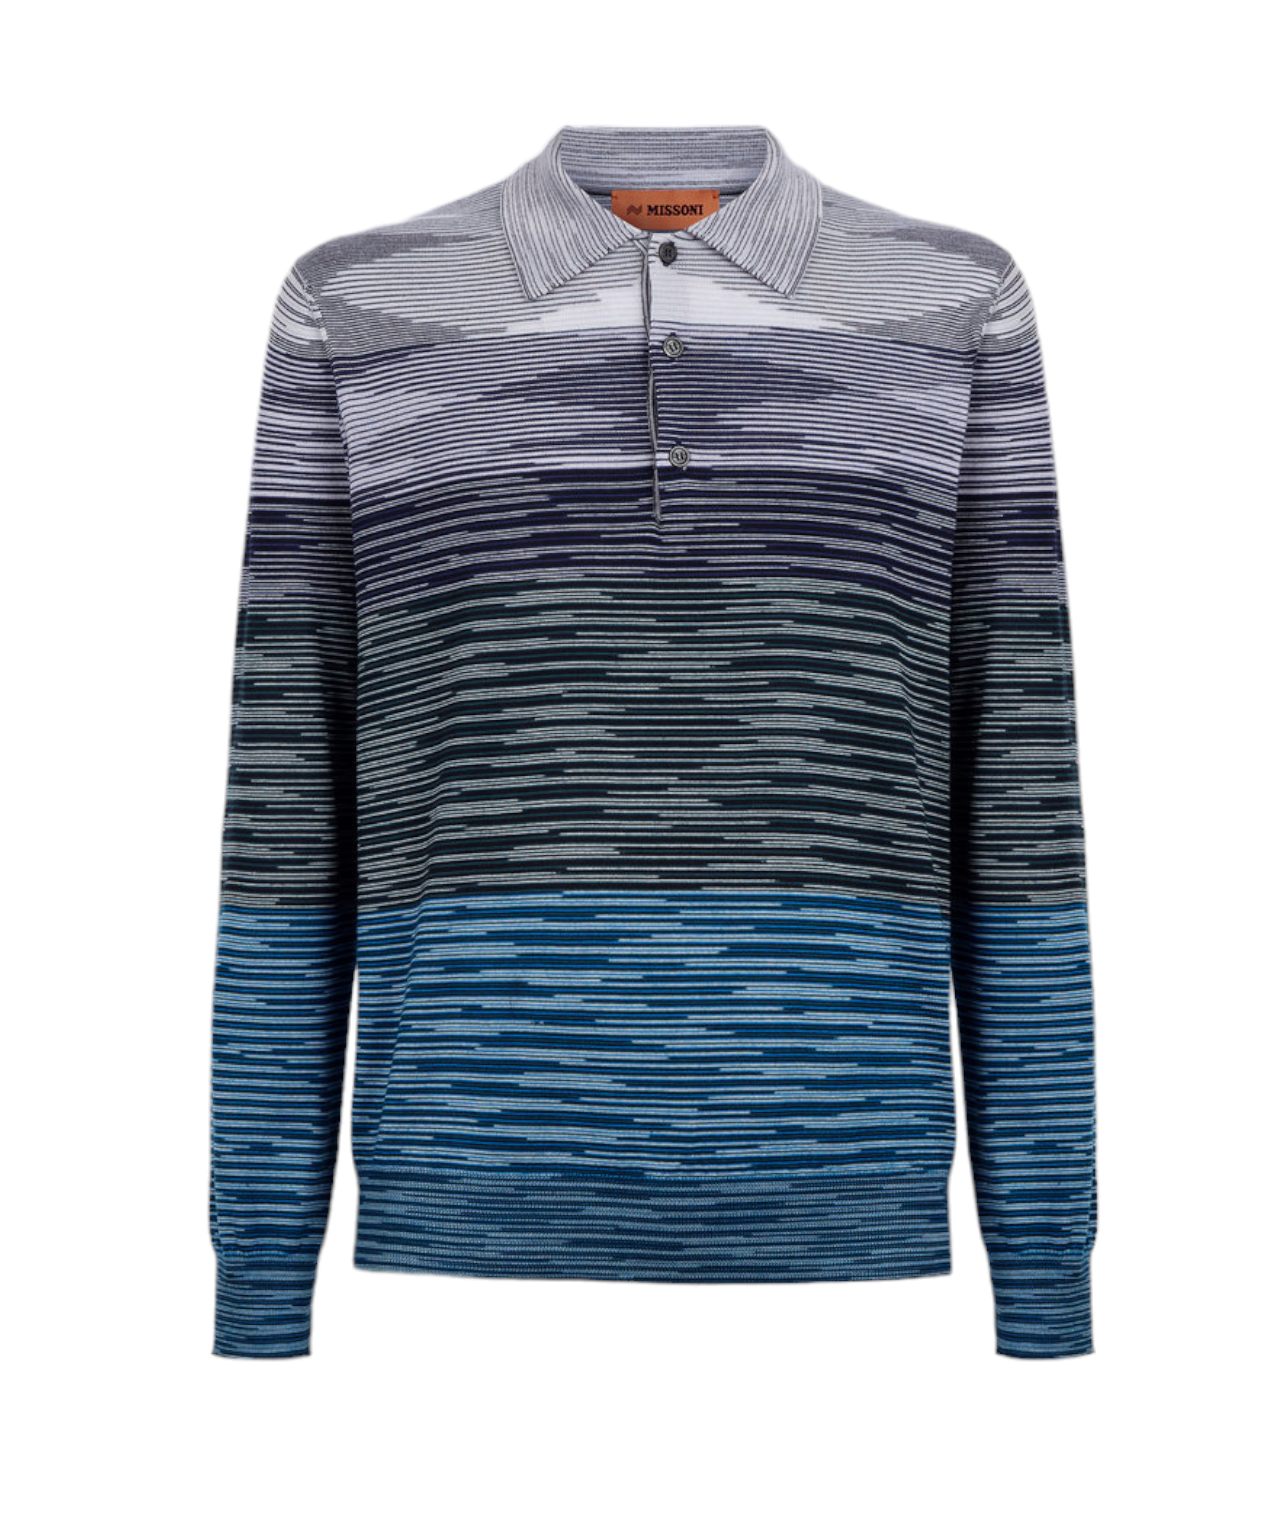 Missoni Men's Long-Sleeved Polo Shirt in Slub Wool Multicoloured - Front View